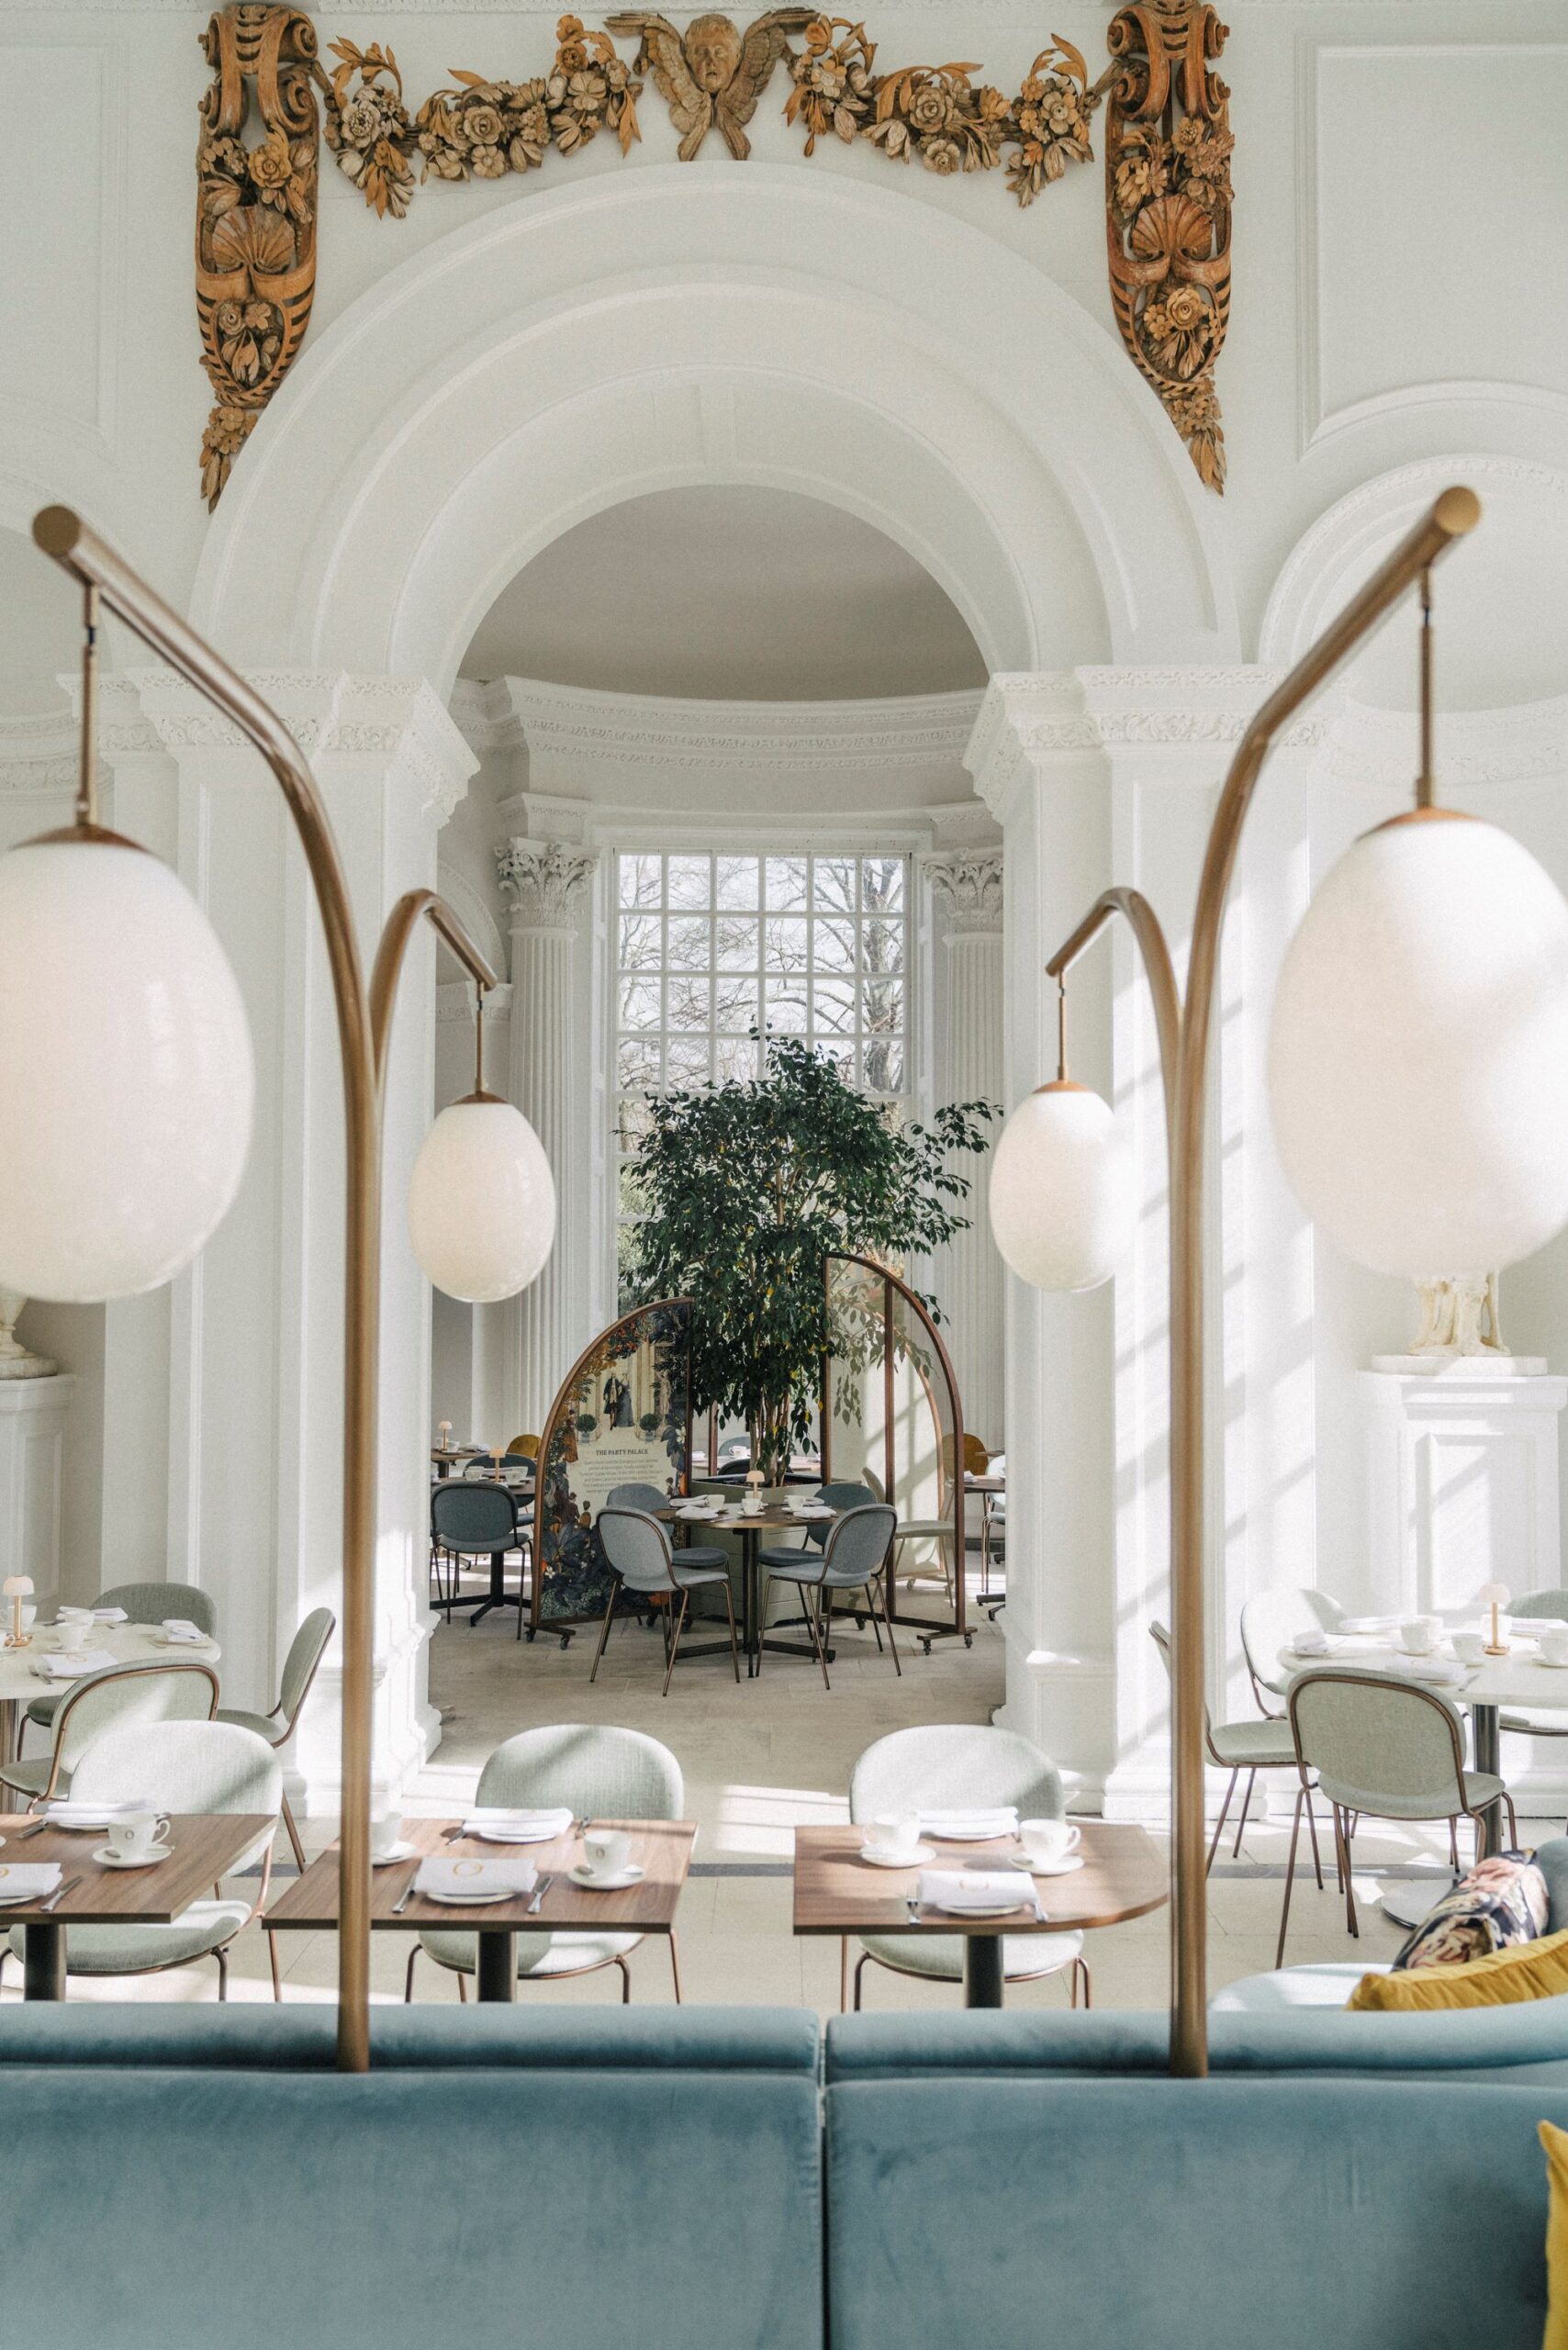 Kensington Palace's Iconic Restaurant, The Orangery, Reopens with Regal Flavours and Elegant Architectural Restoration